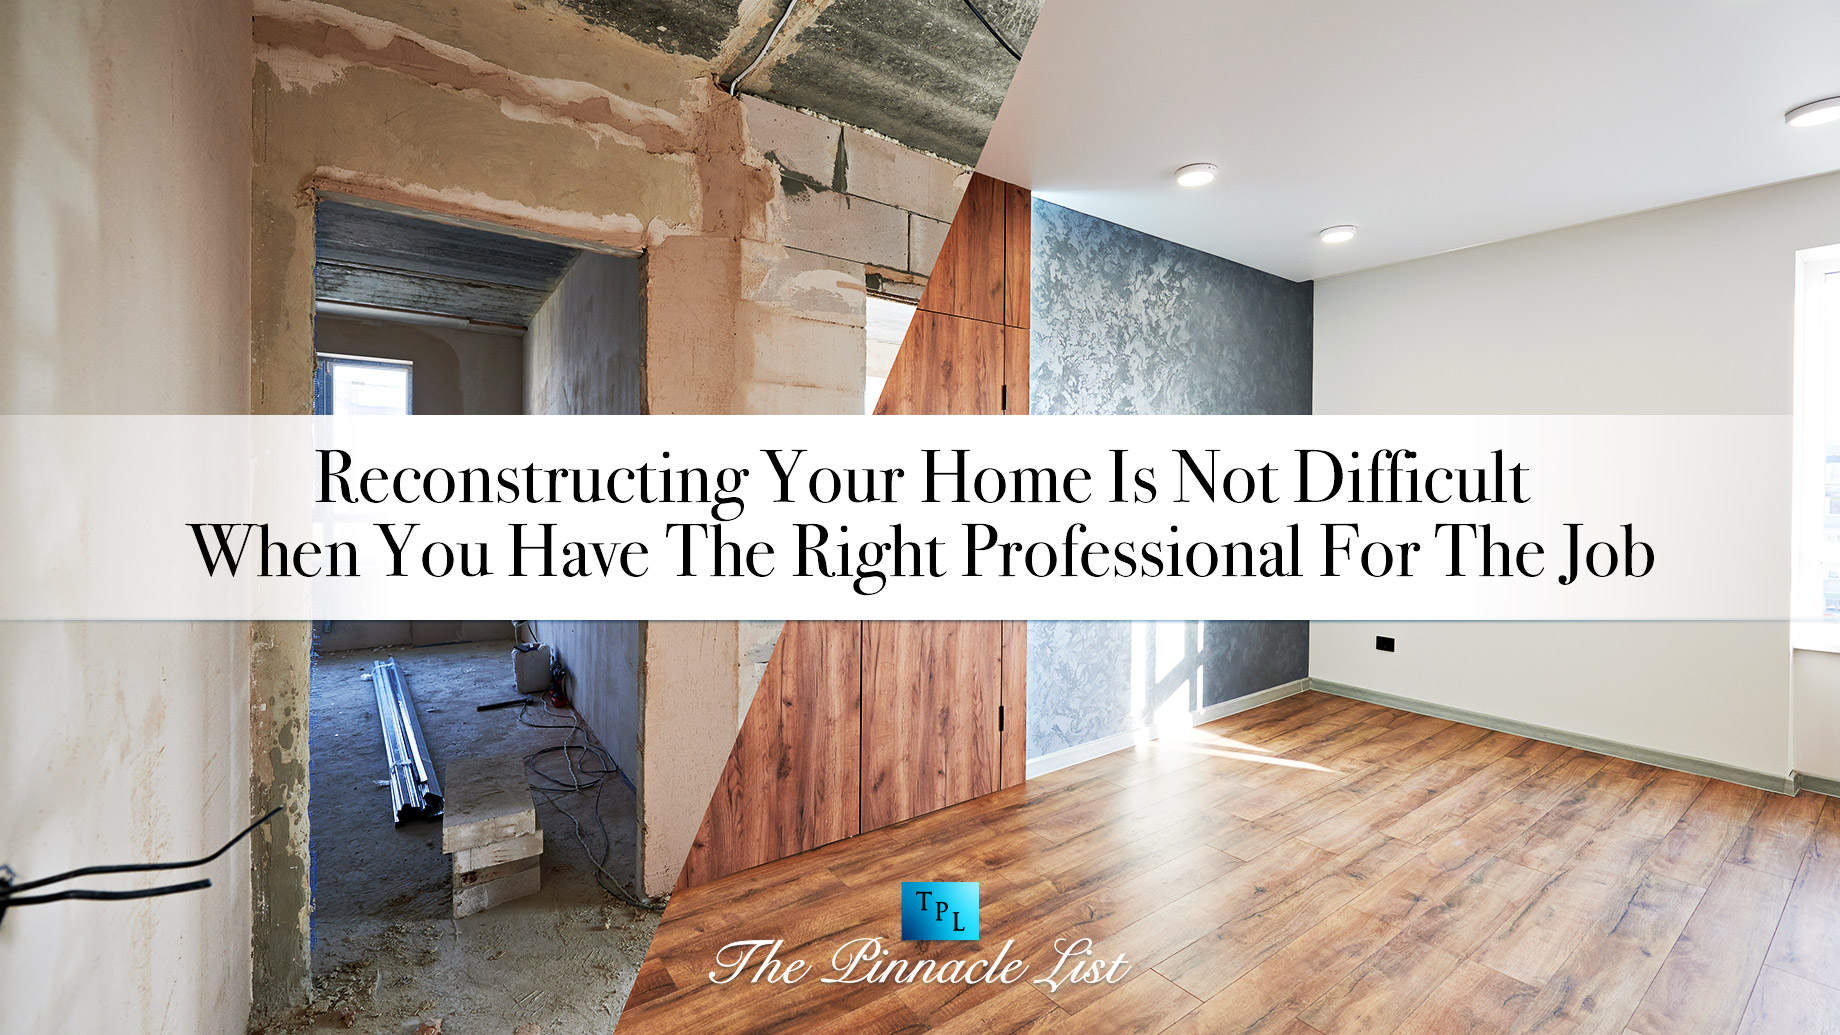 Reconstructing Your Home Is Not Difficult When You Have The Right Professional For The Job